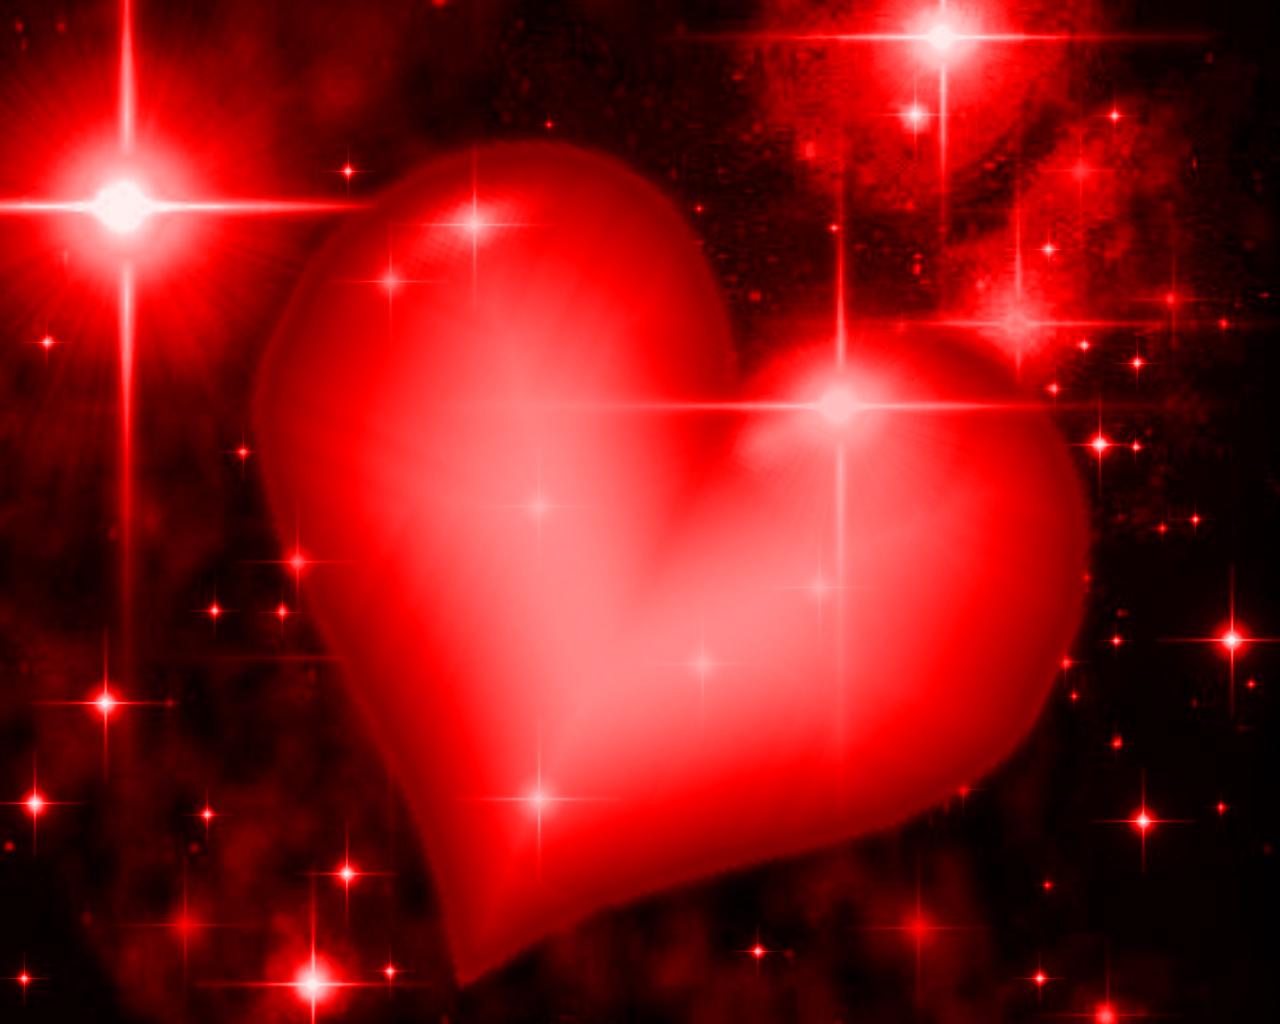 Cool Heart Wallpapers